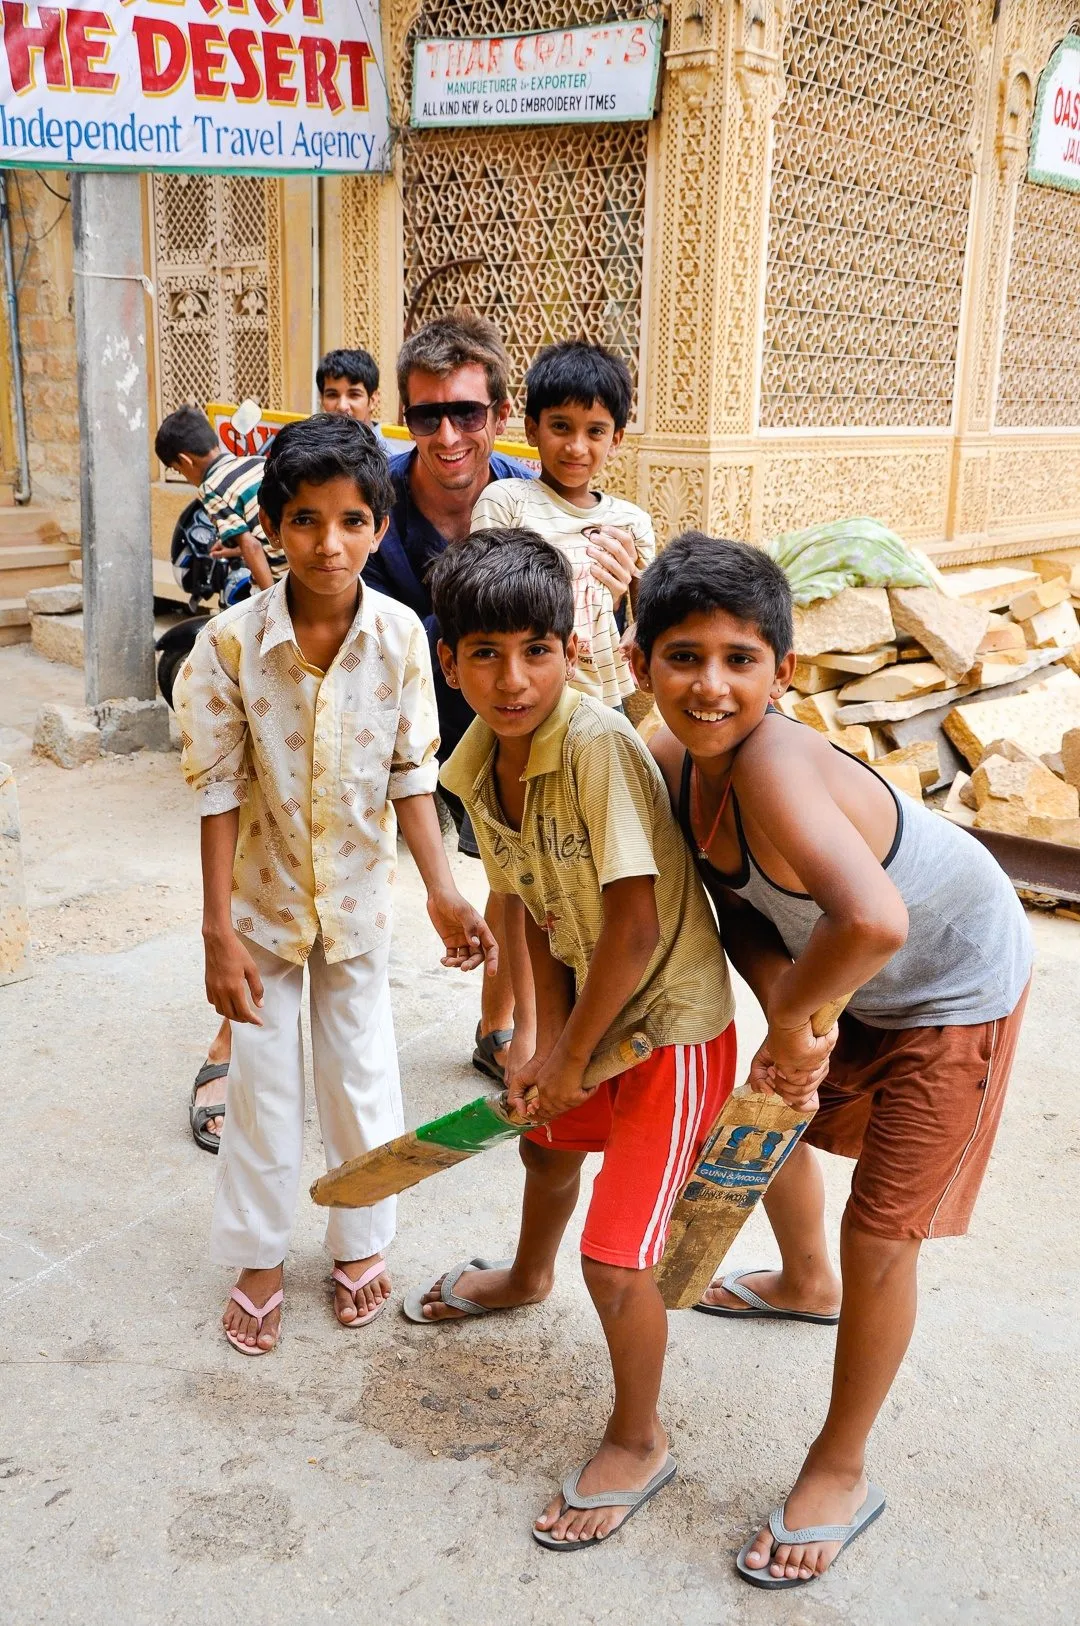 The “Cricket Kids” chanted Olé Olé Olé for Ernie until he went to bat in a back ally in Jaisalmer. He crushed their only cricket ball over the roof at the end of the ally. They went nuts cheering for a few seconds, then ran to him to get money for a new ball.